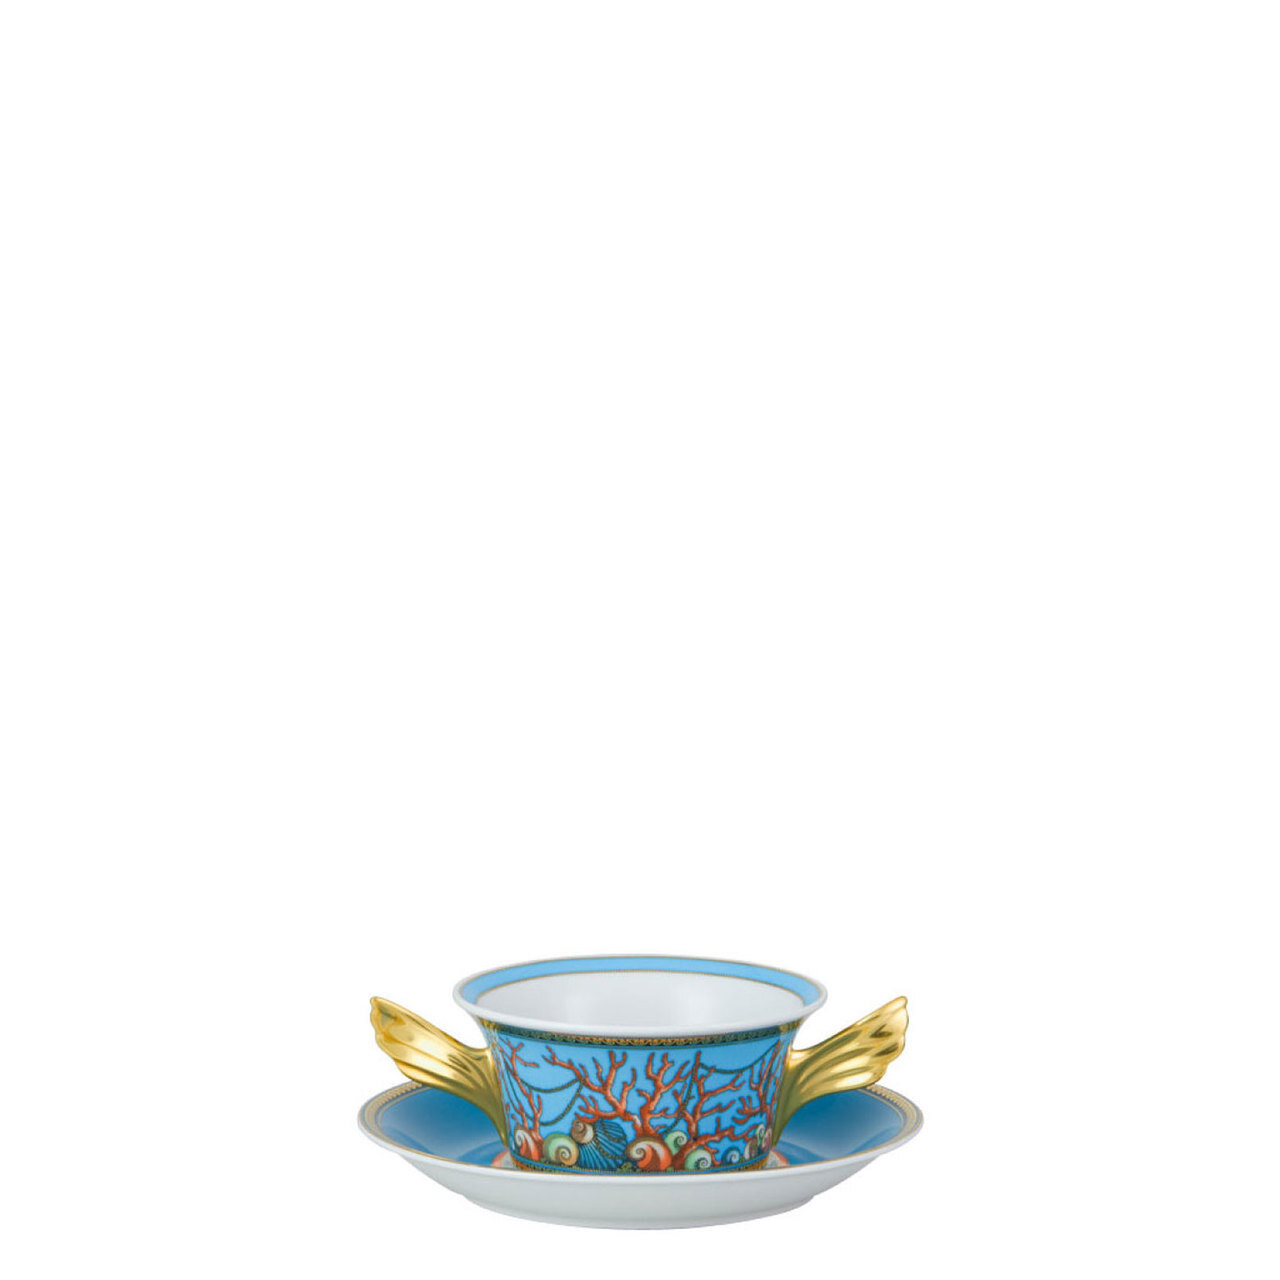 Versace La Mer Cream Soup Cup and Saucer 6 3/4 Inch 10 oz.